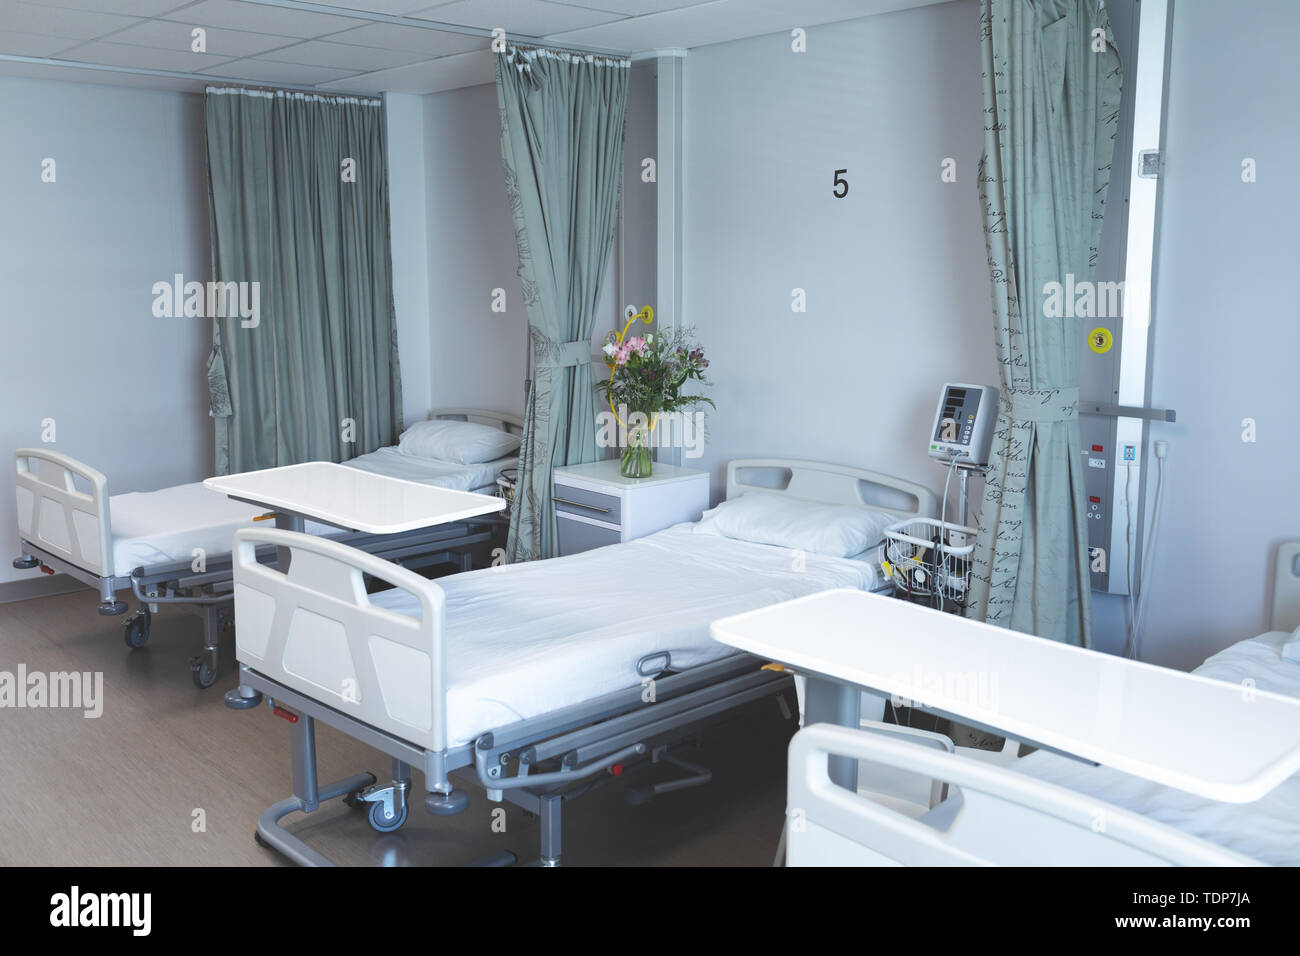 Hospital ward with empty beds Stock Photo